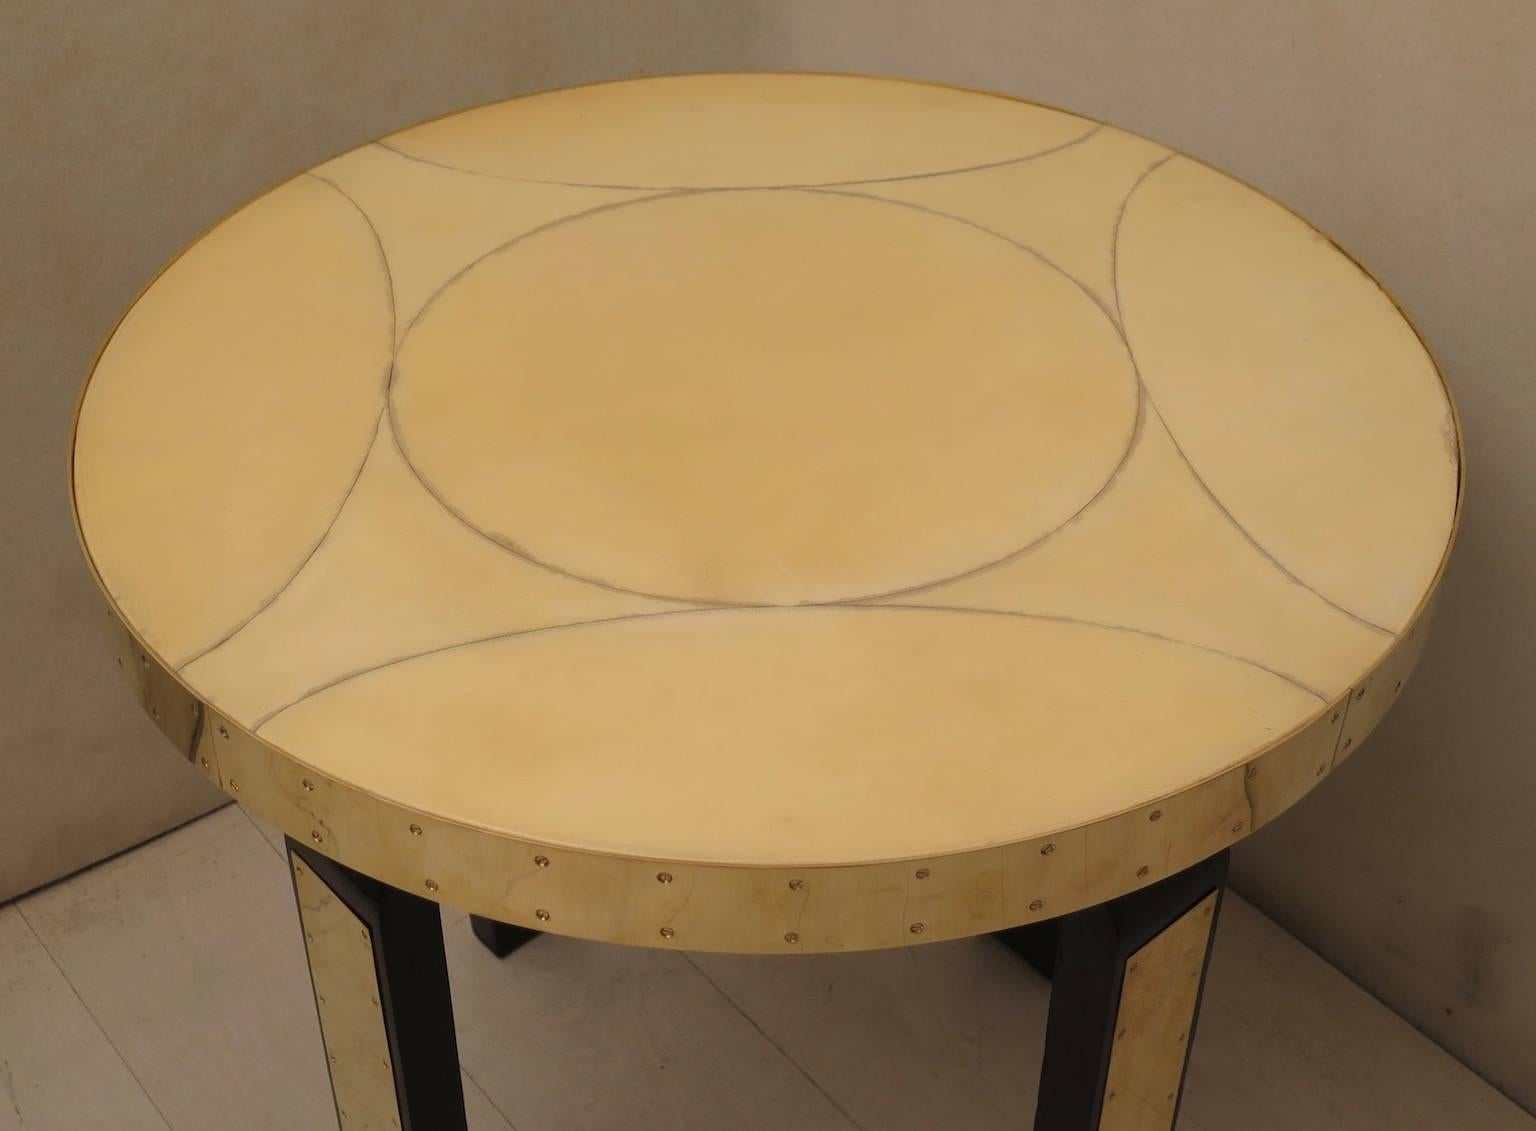 Tough Art Nouveau rigorous but simply amazing as a whole. Austrian Art Nouveau side table. 

Top covered in goat skin and polished in resin. Along the edge of the table runs a band of polished brass, held by small brass screws. The legs are all